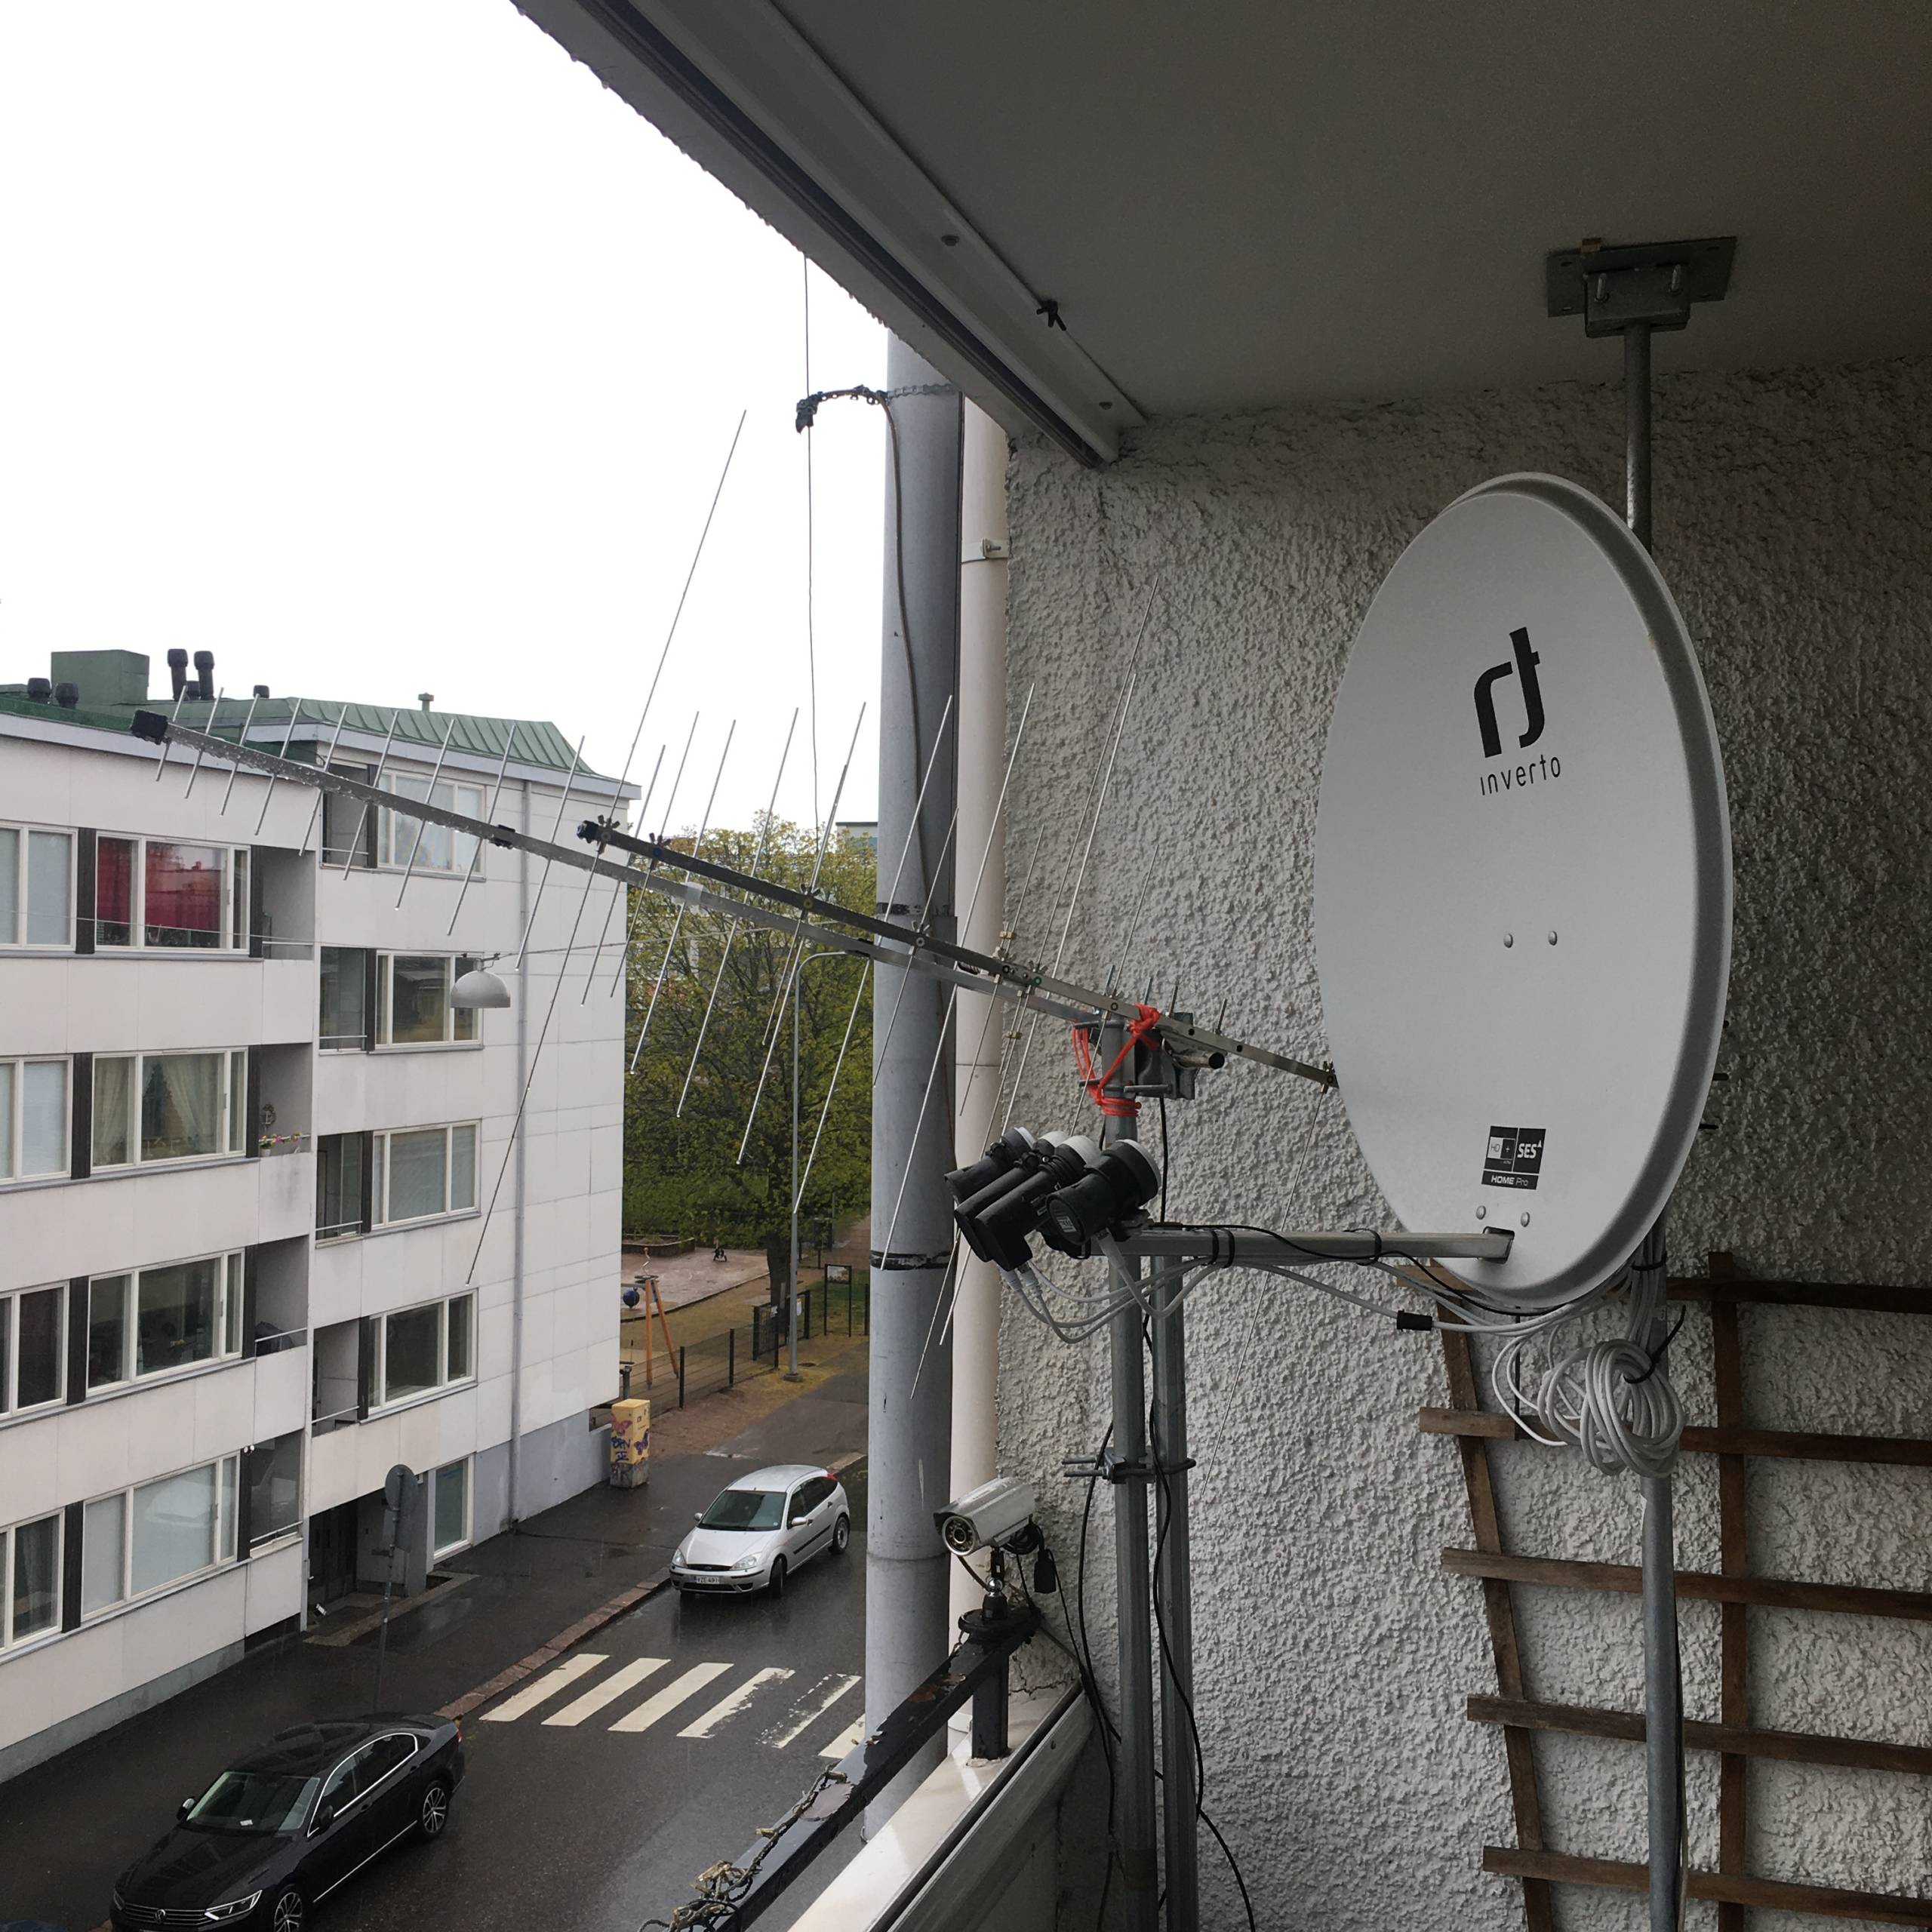 Check out my balcony antenna setup for VHF/UHF/SAT bands